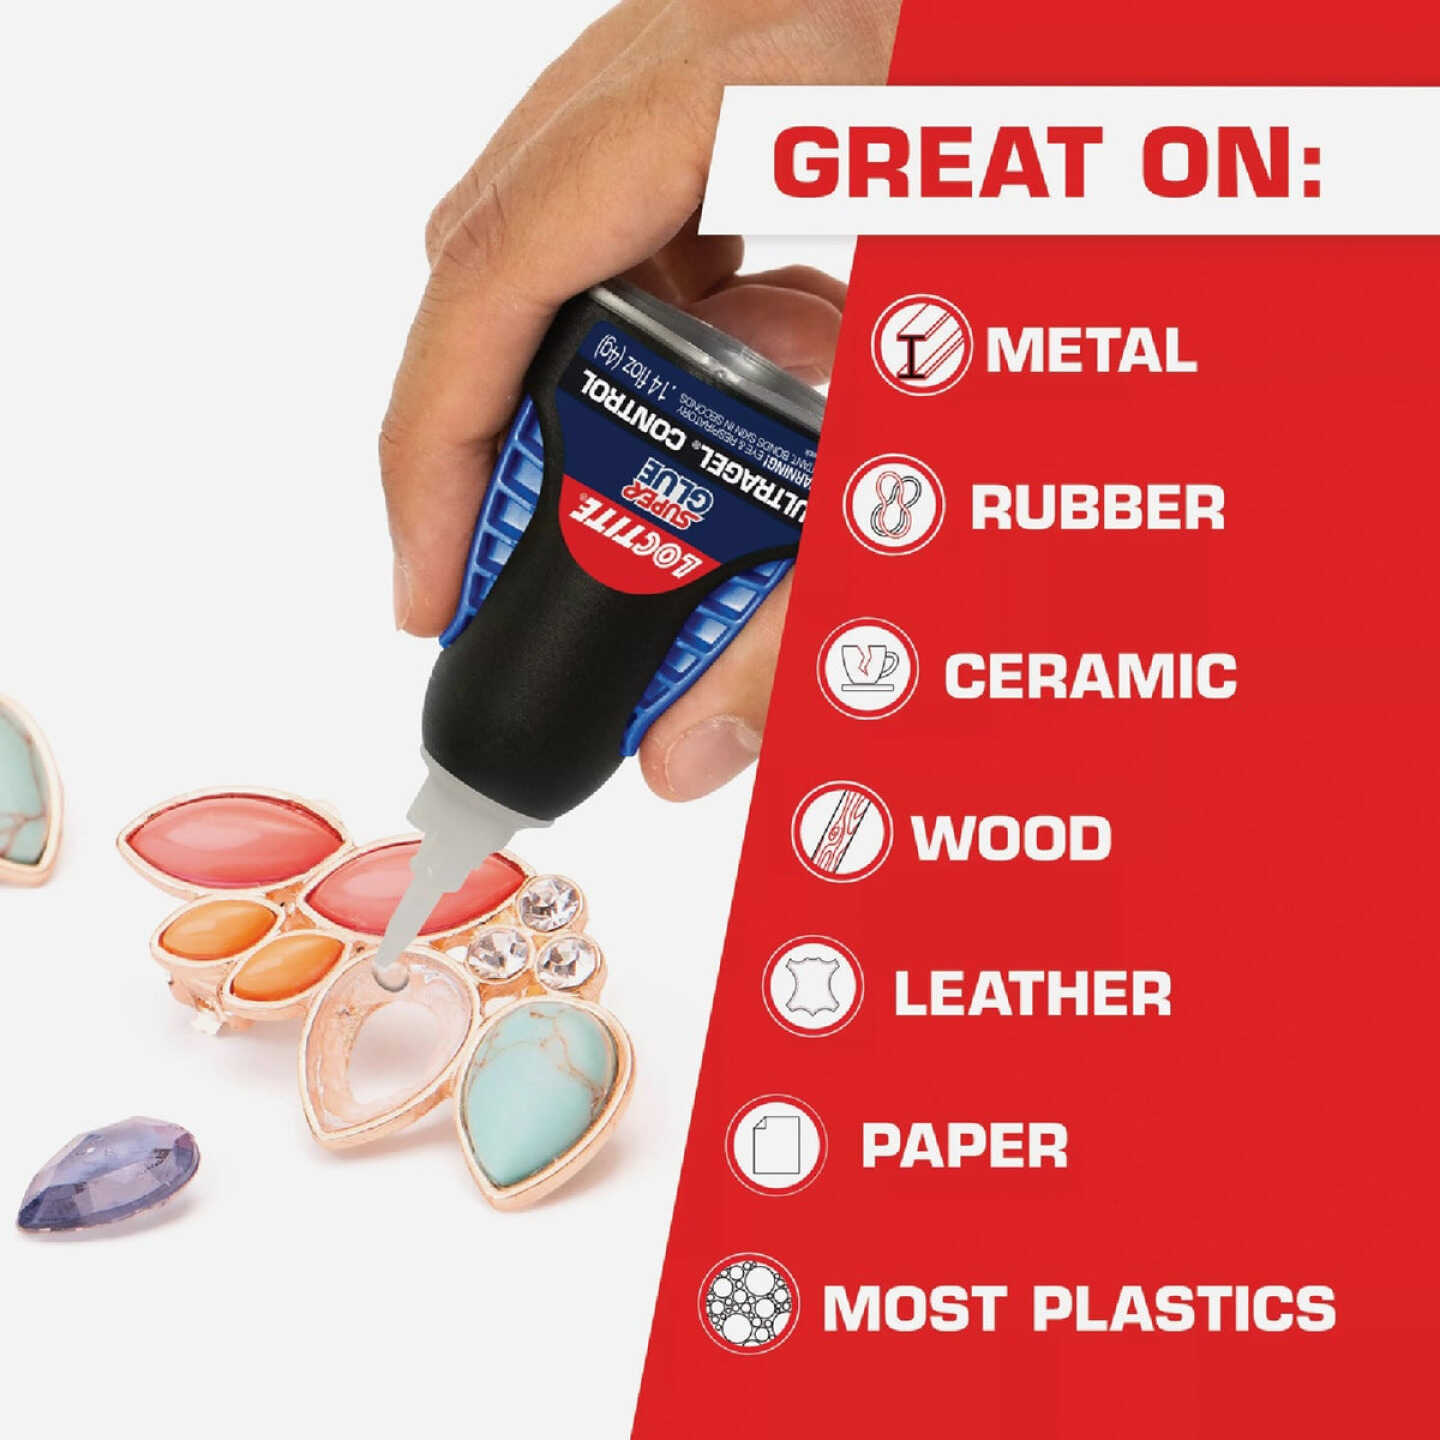 Loctite Super Glue Ultra Gel Control Testing and Review - Loctite